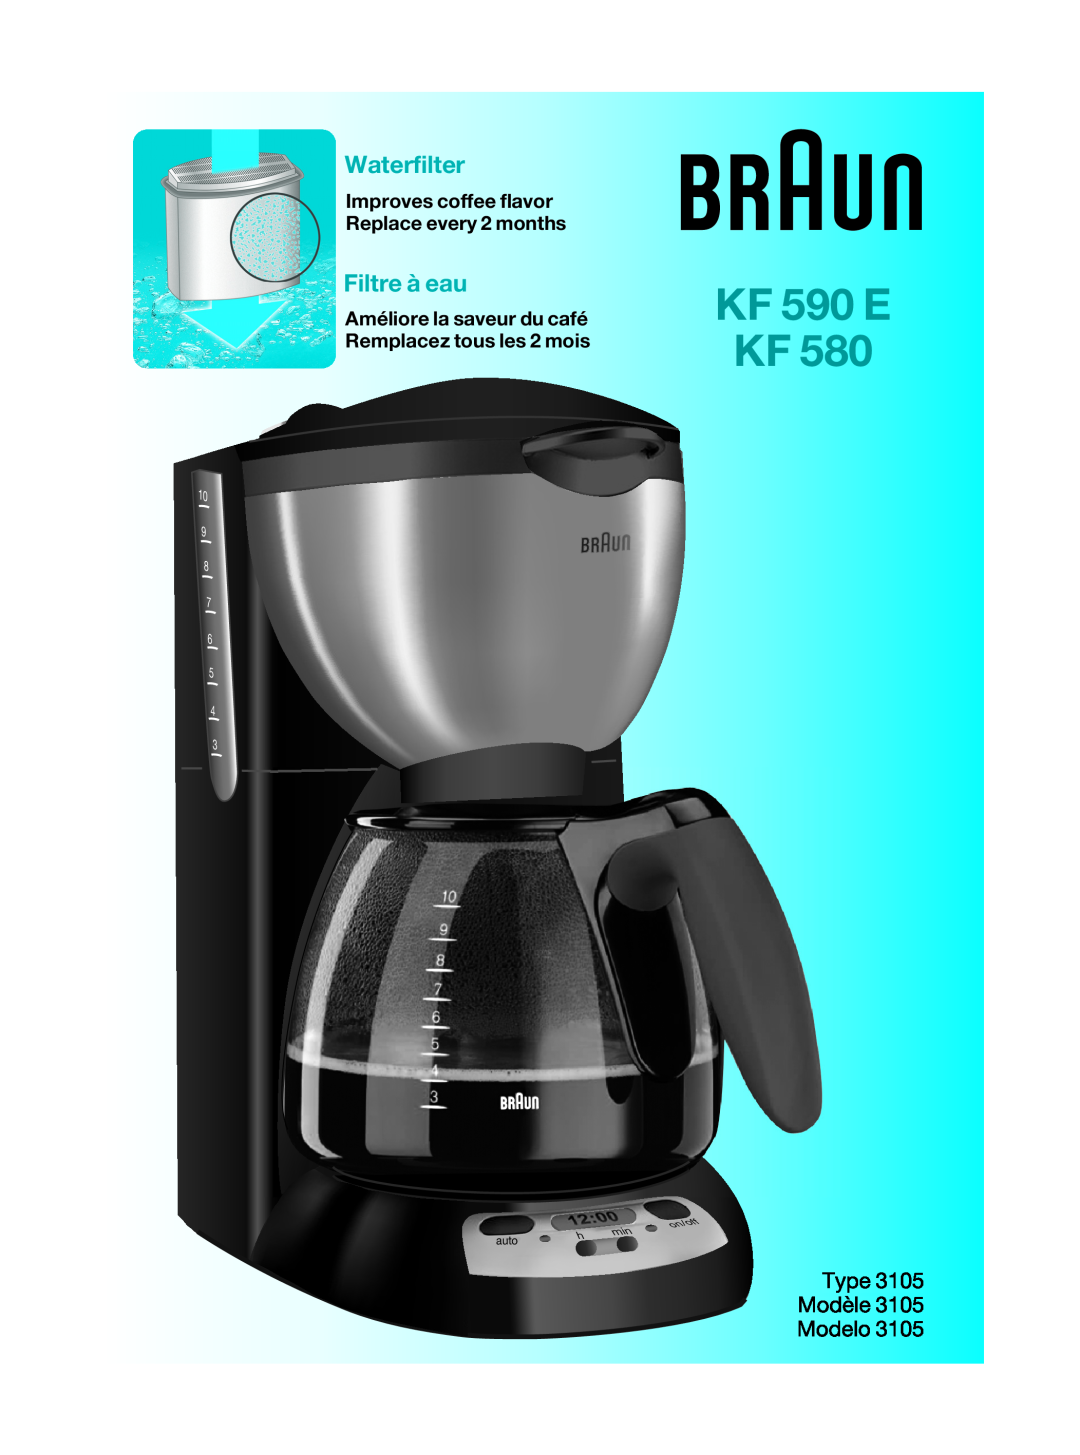 Braun KF590E manual KF 590 E KF, Waterfilter, Filtre à eau, Improves coffee flavor Replace every 2 months, 10 9 8, auto 